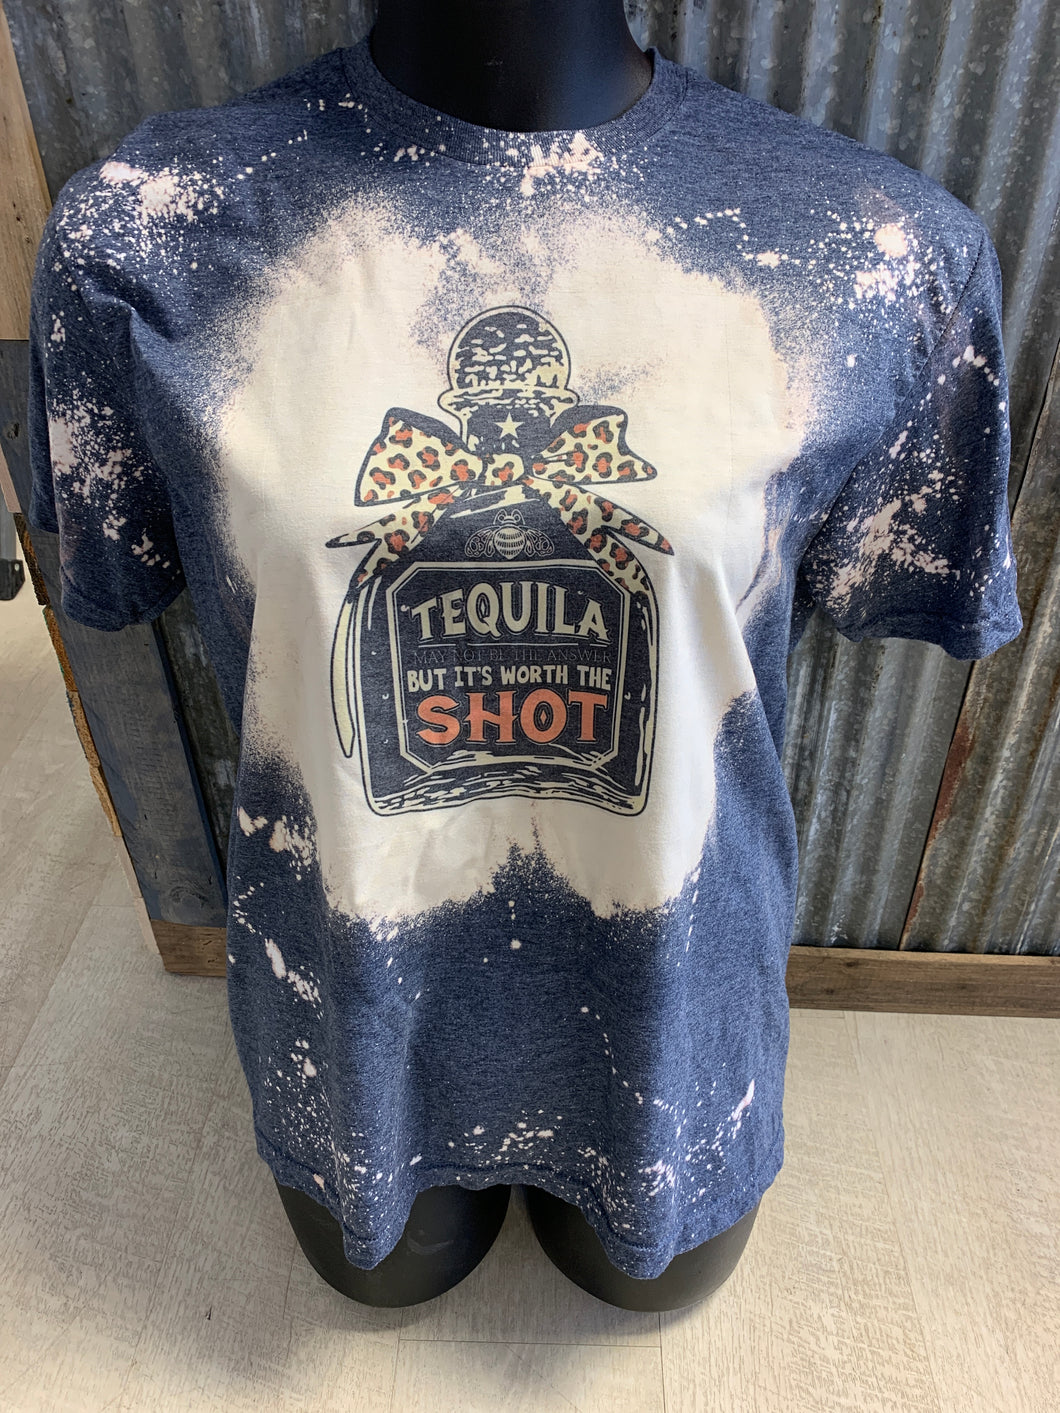 Tequila may not be the answer but it’s worth the shot bleach t-shirt